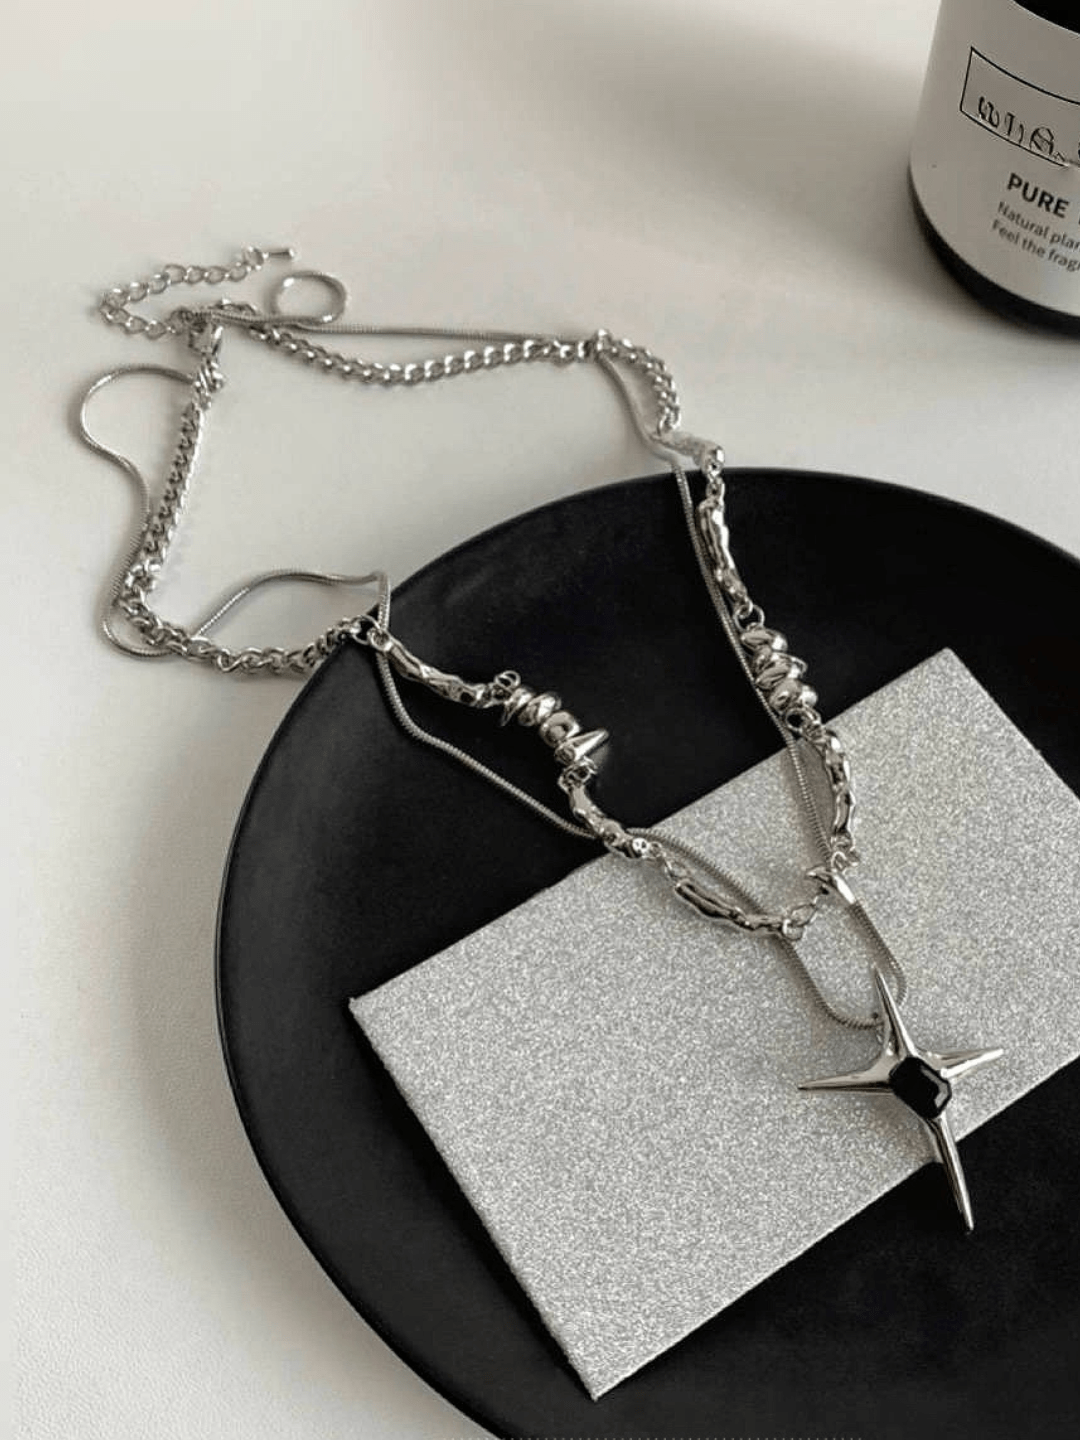 [CHEALIMPID] Double Layer Chain Asymmetrical Necklace na937